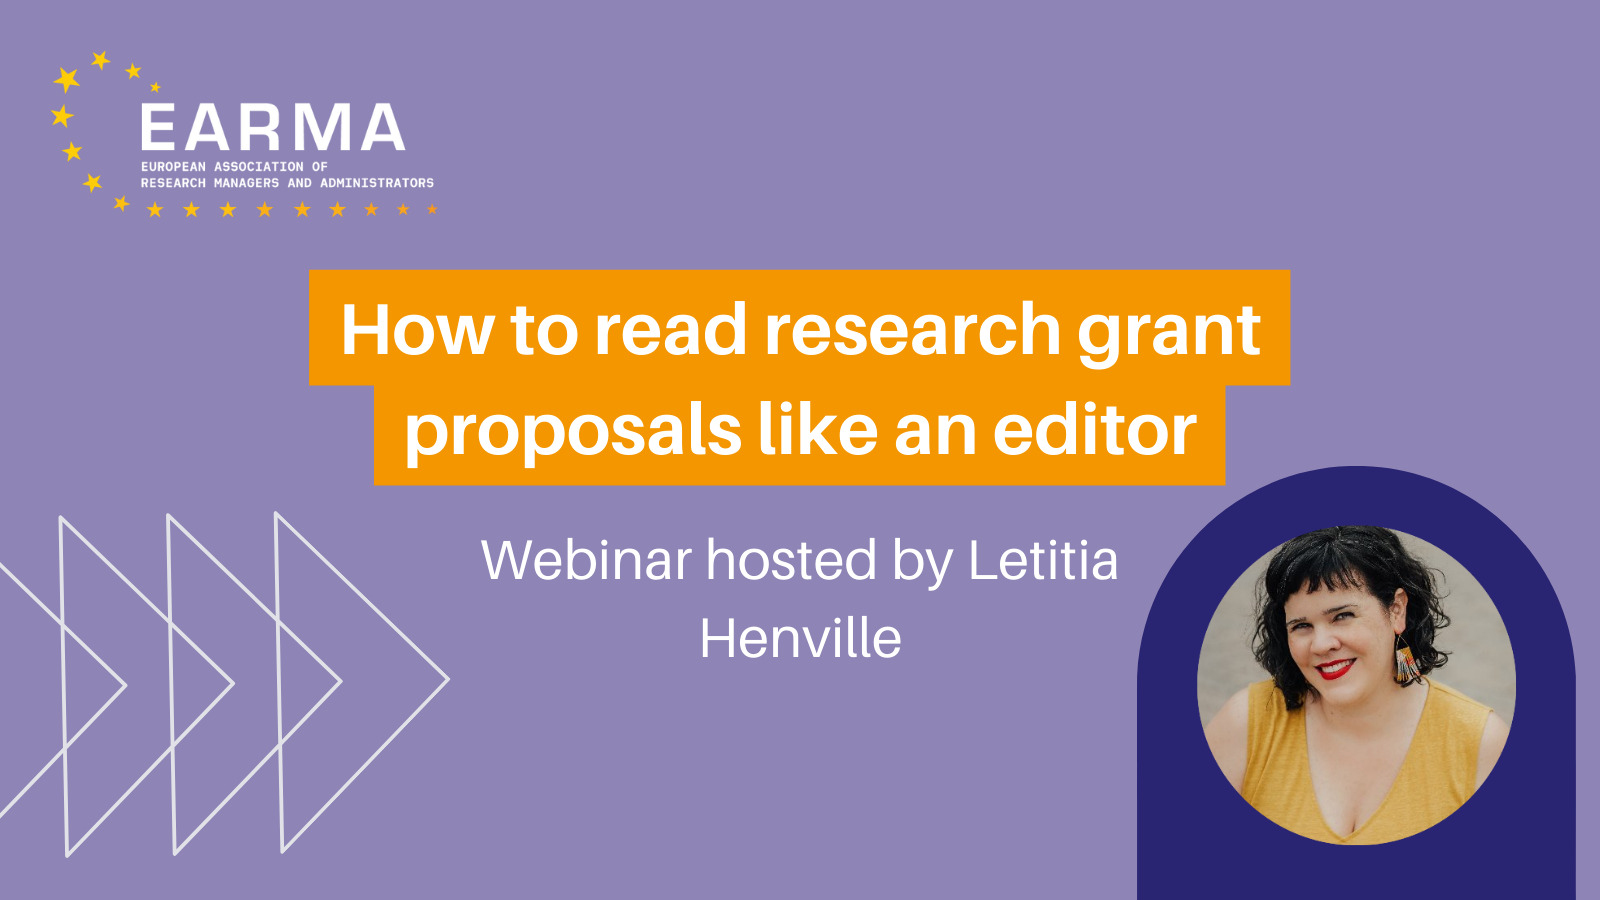 How to read research grant proposals like an editor